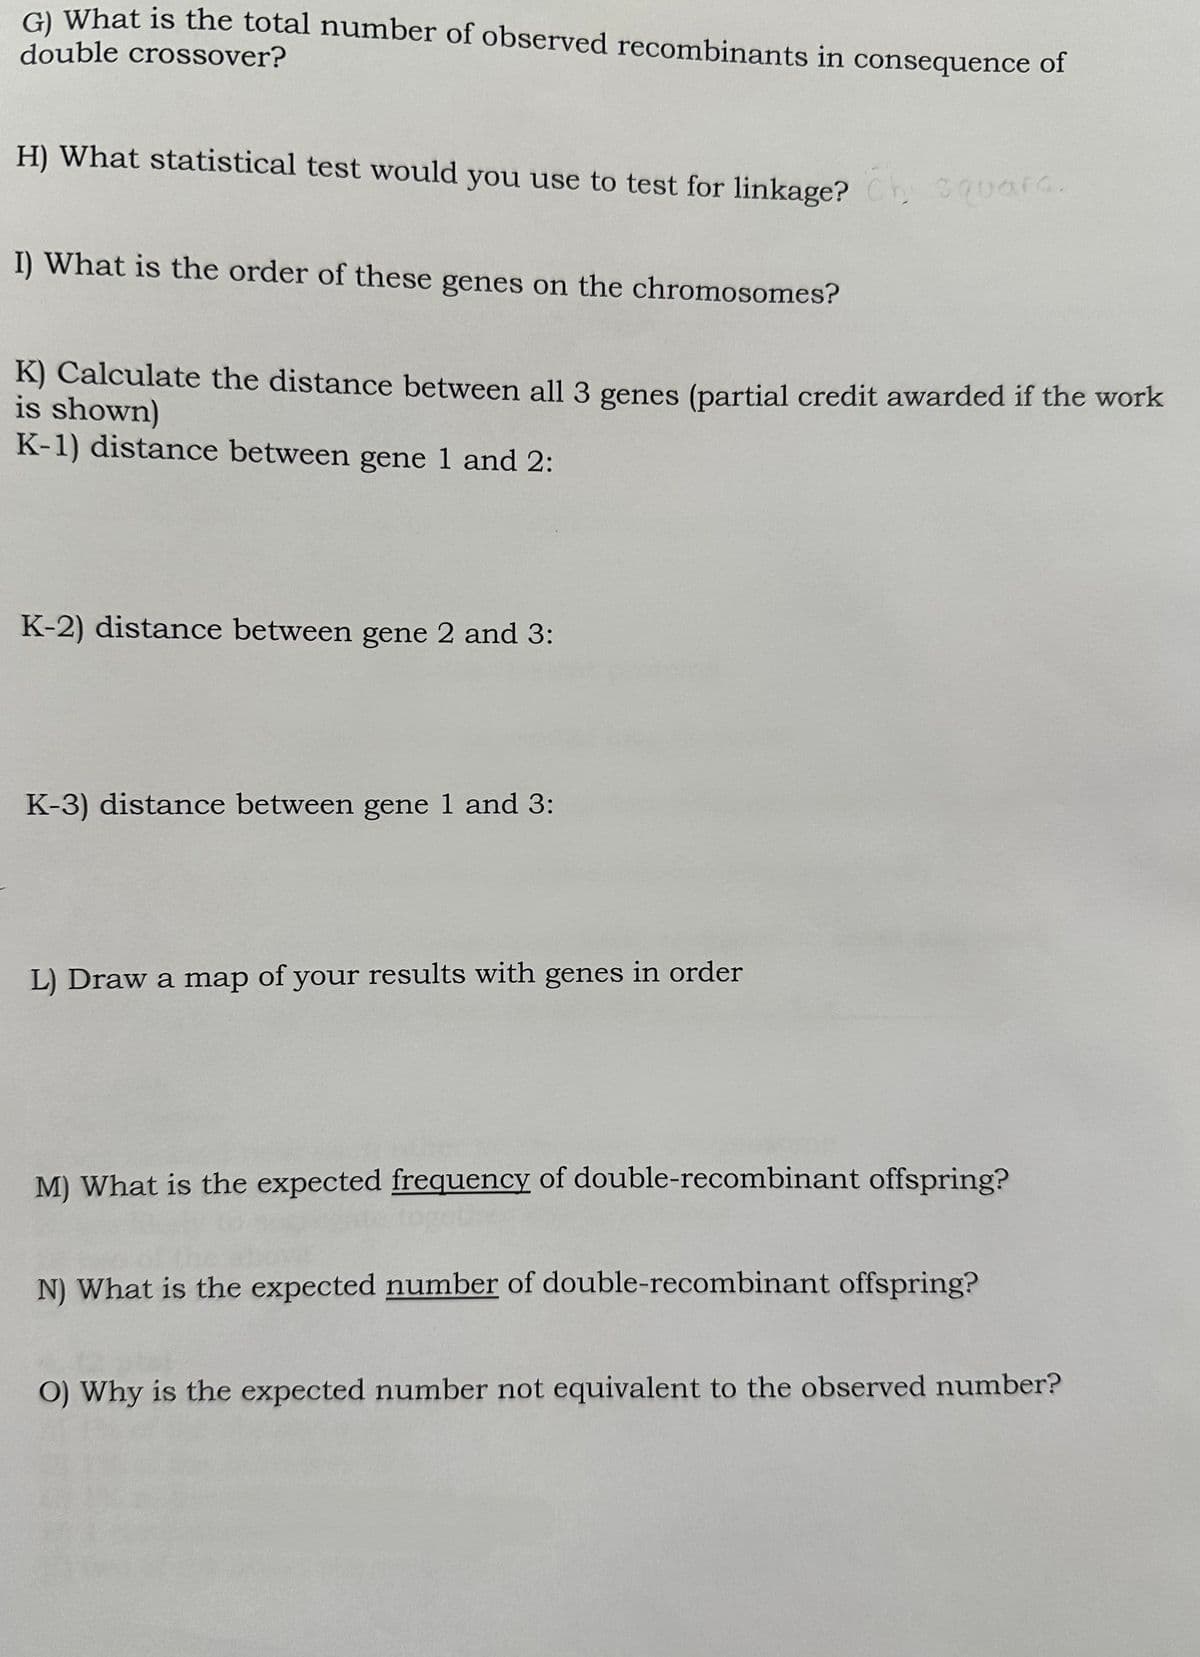 G) What is the total number of observed recombinants in consequence of
double crossover?
H) What statistical test would you use to test for linkage? Chi square.
I) What is the order of these genes on the chromosomes?
K) Calculate the distance between all 3 genes (partial credit awarded if the work
is shown)
K-1) distance between gene 1 and 2:
K-2) distance between gene 2 and 3:
K-3) distance between gene 1 and 3:
L) Draw a map of your results with genes in order
M) What is the expected frequency of double-recombinant offspring?
N) What is the expected number of double-recombinant offspring?
O) Why is the expected number not equivalent to the observed number?